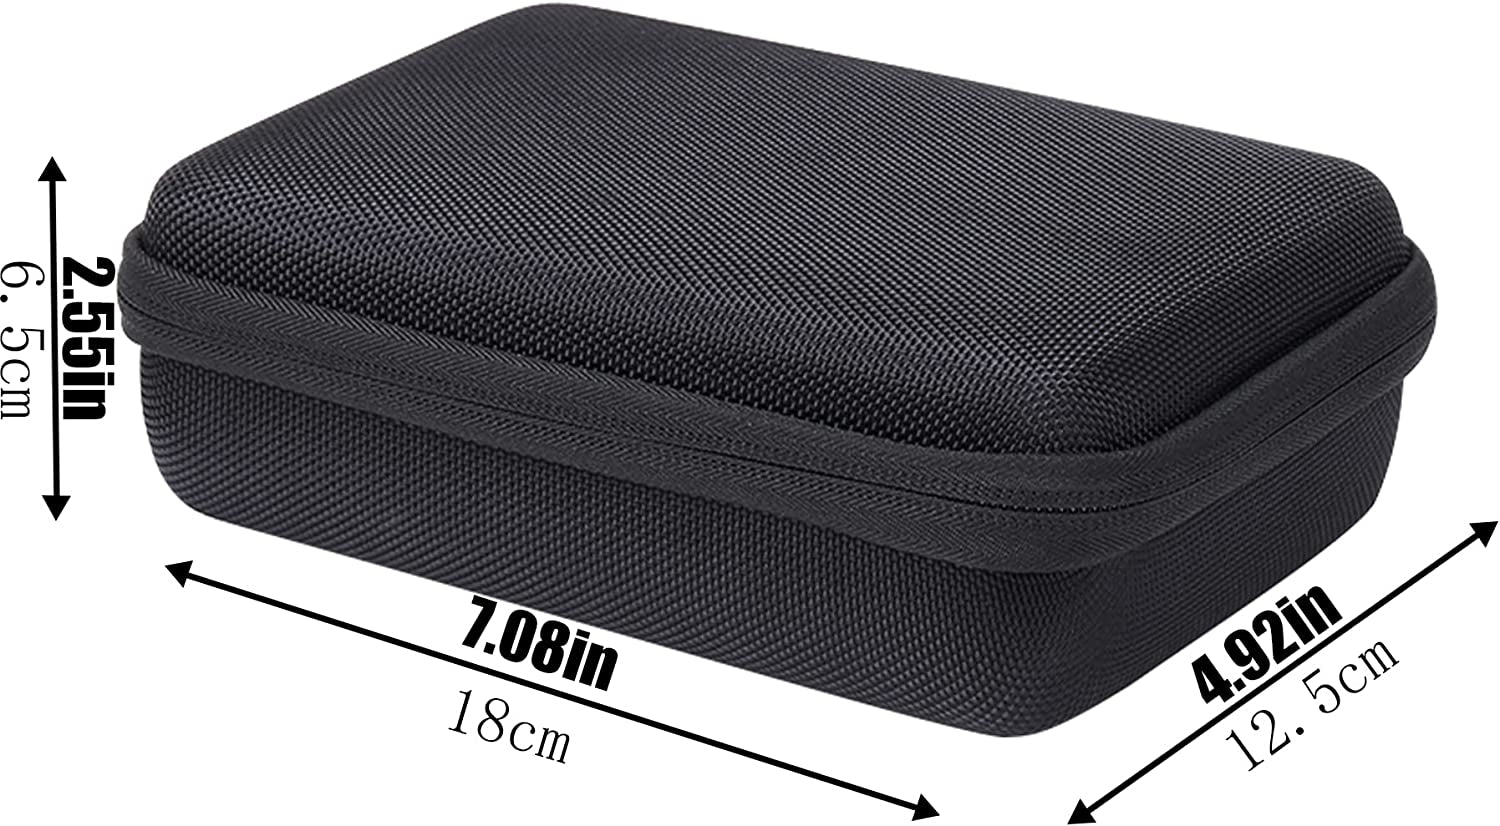 Portable Carrying Case Storage Bag for Anker 737 Power Bank Travel